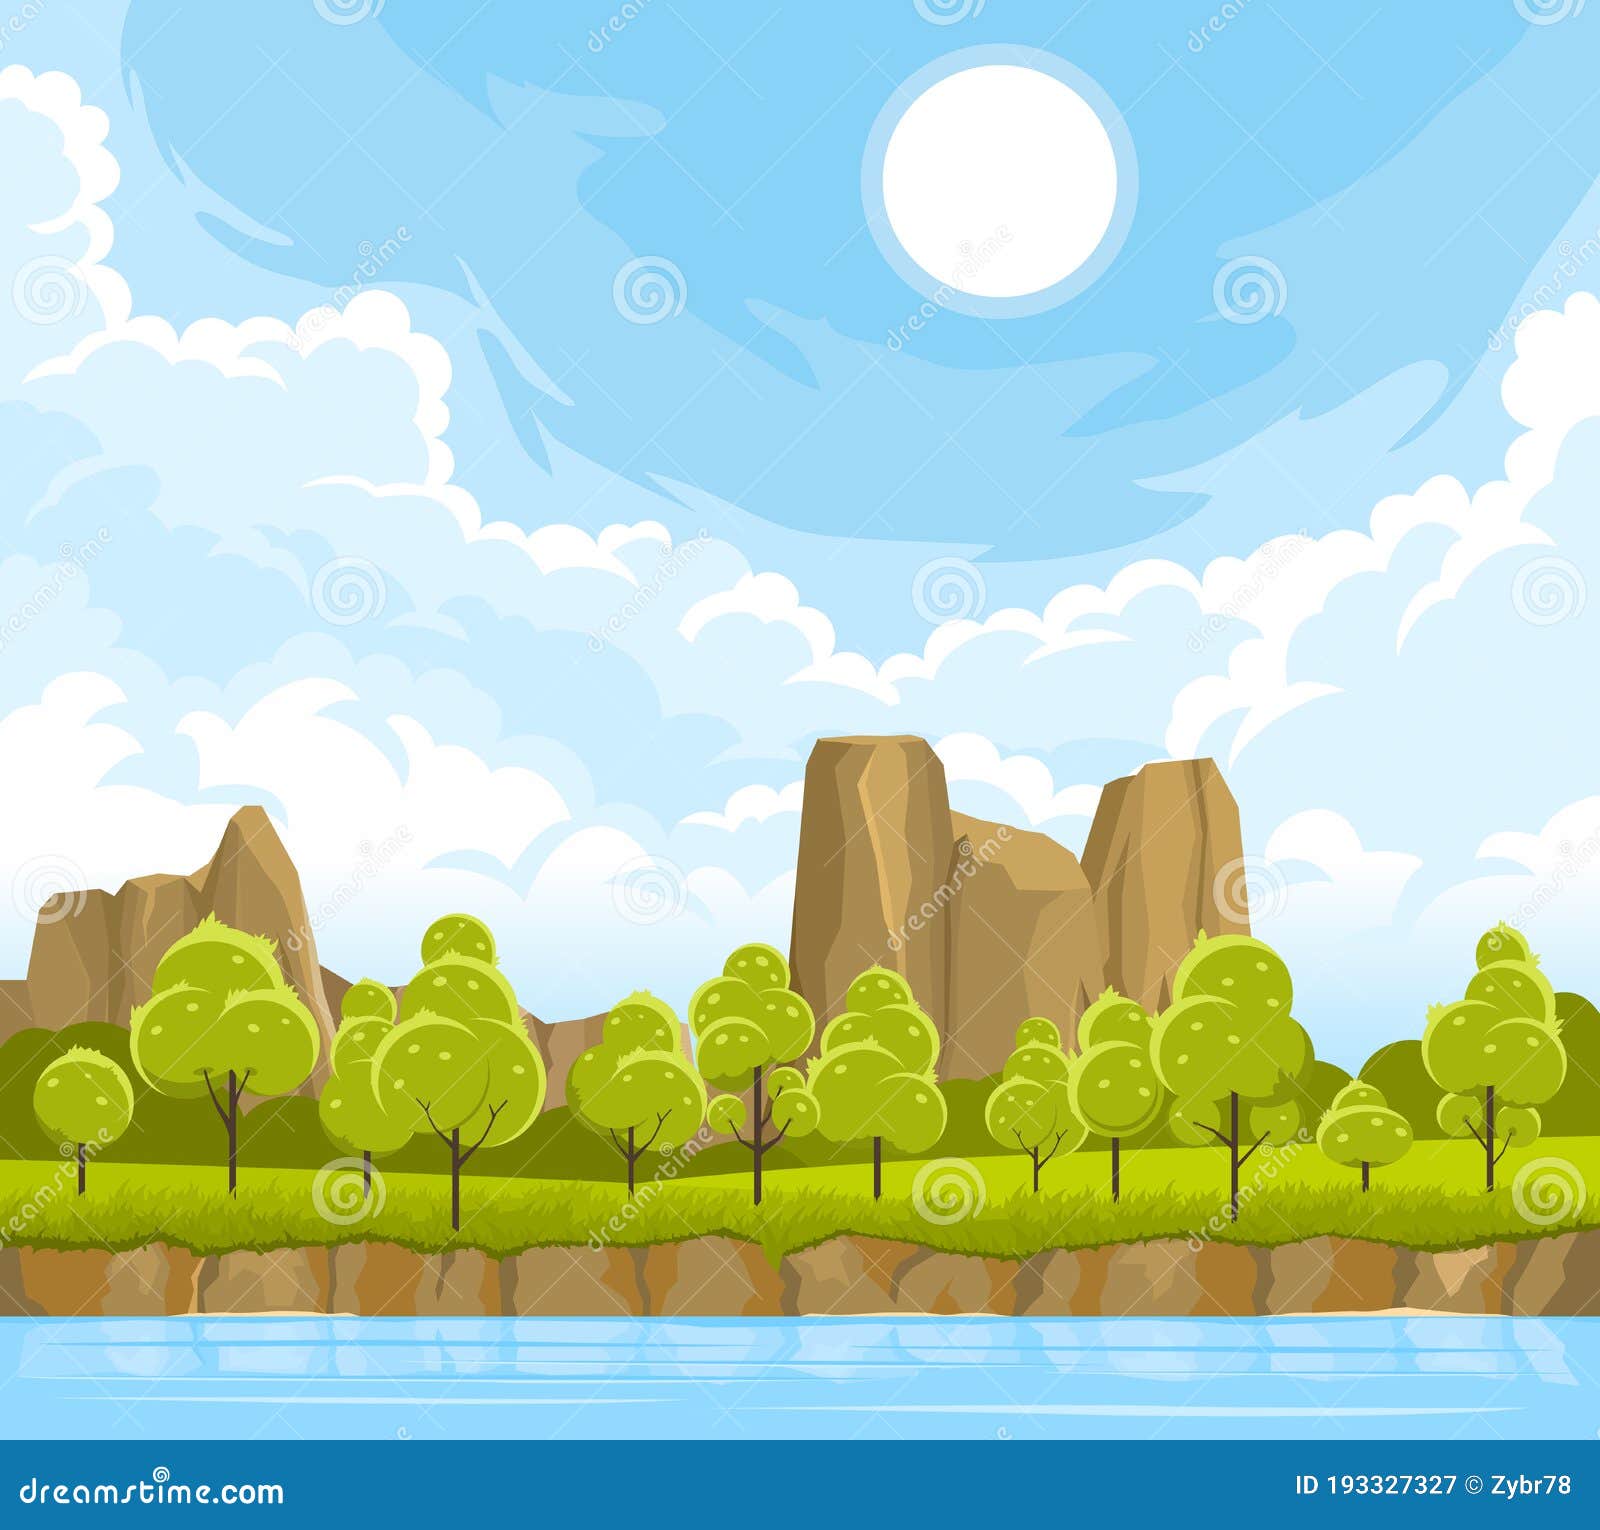 Summer Landscape with River Stock Vector - Illustration of field, tree ...